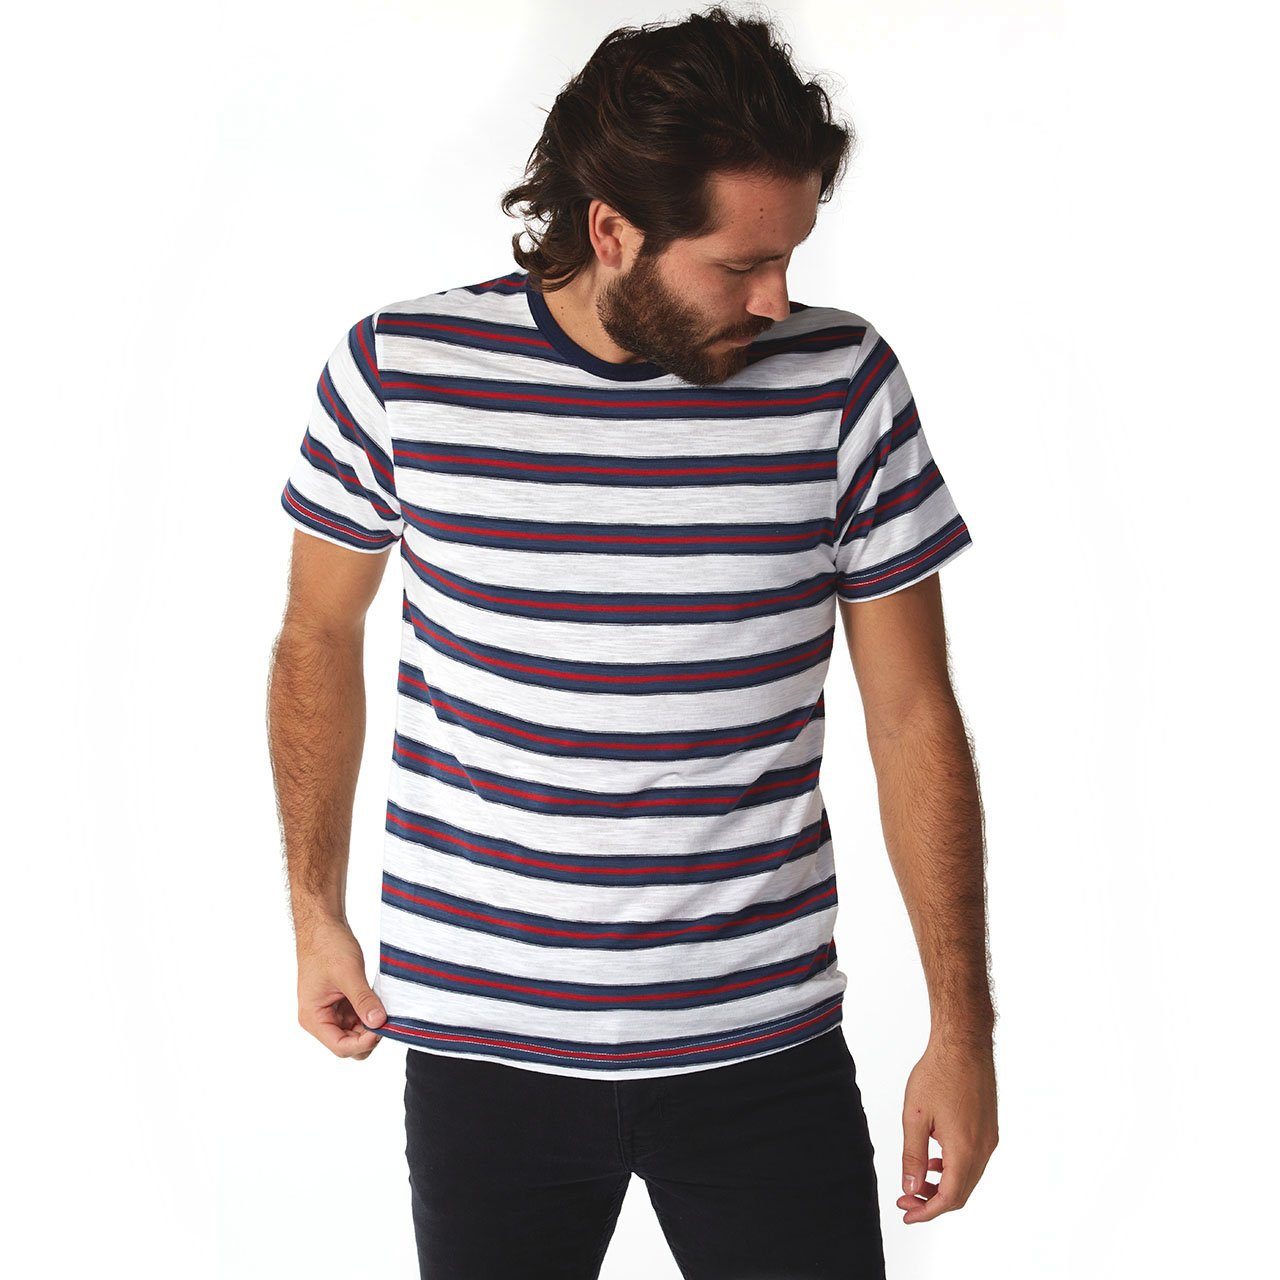 Mateo Striped Tee - PX Clothing